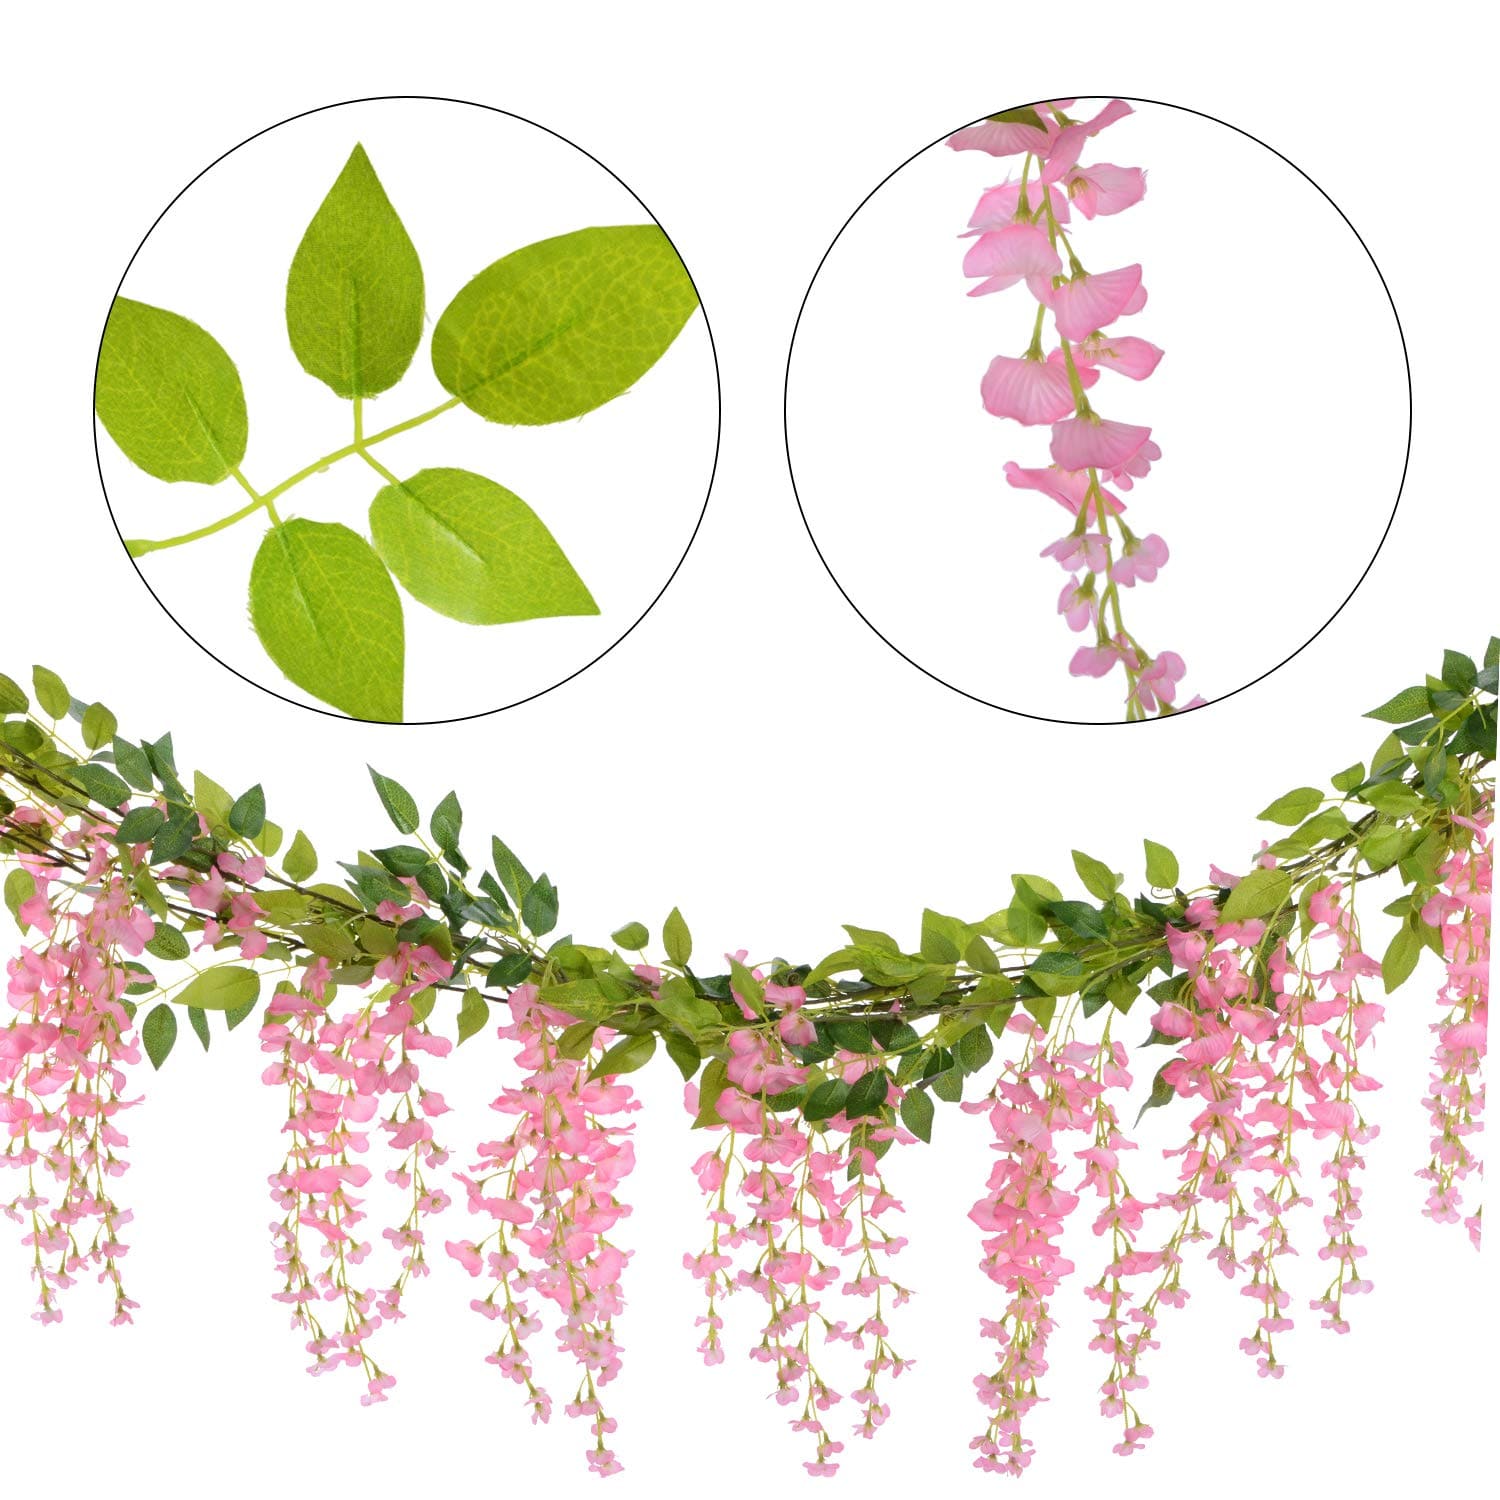 Wisteria Artificial Flowers Garland 4Pcs Total 28.8ft